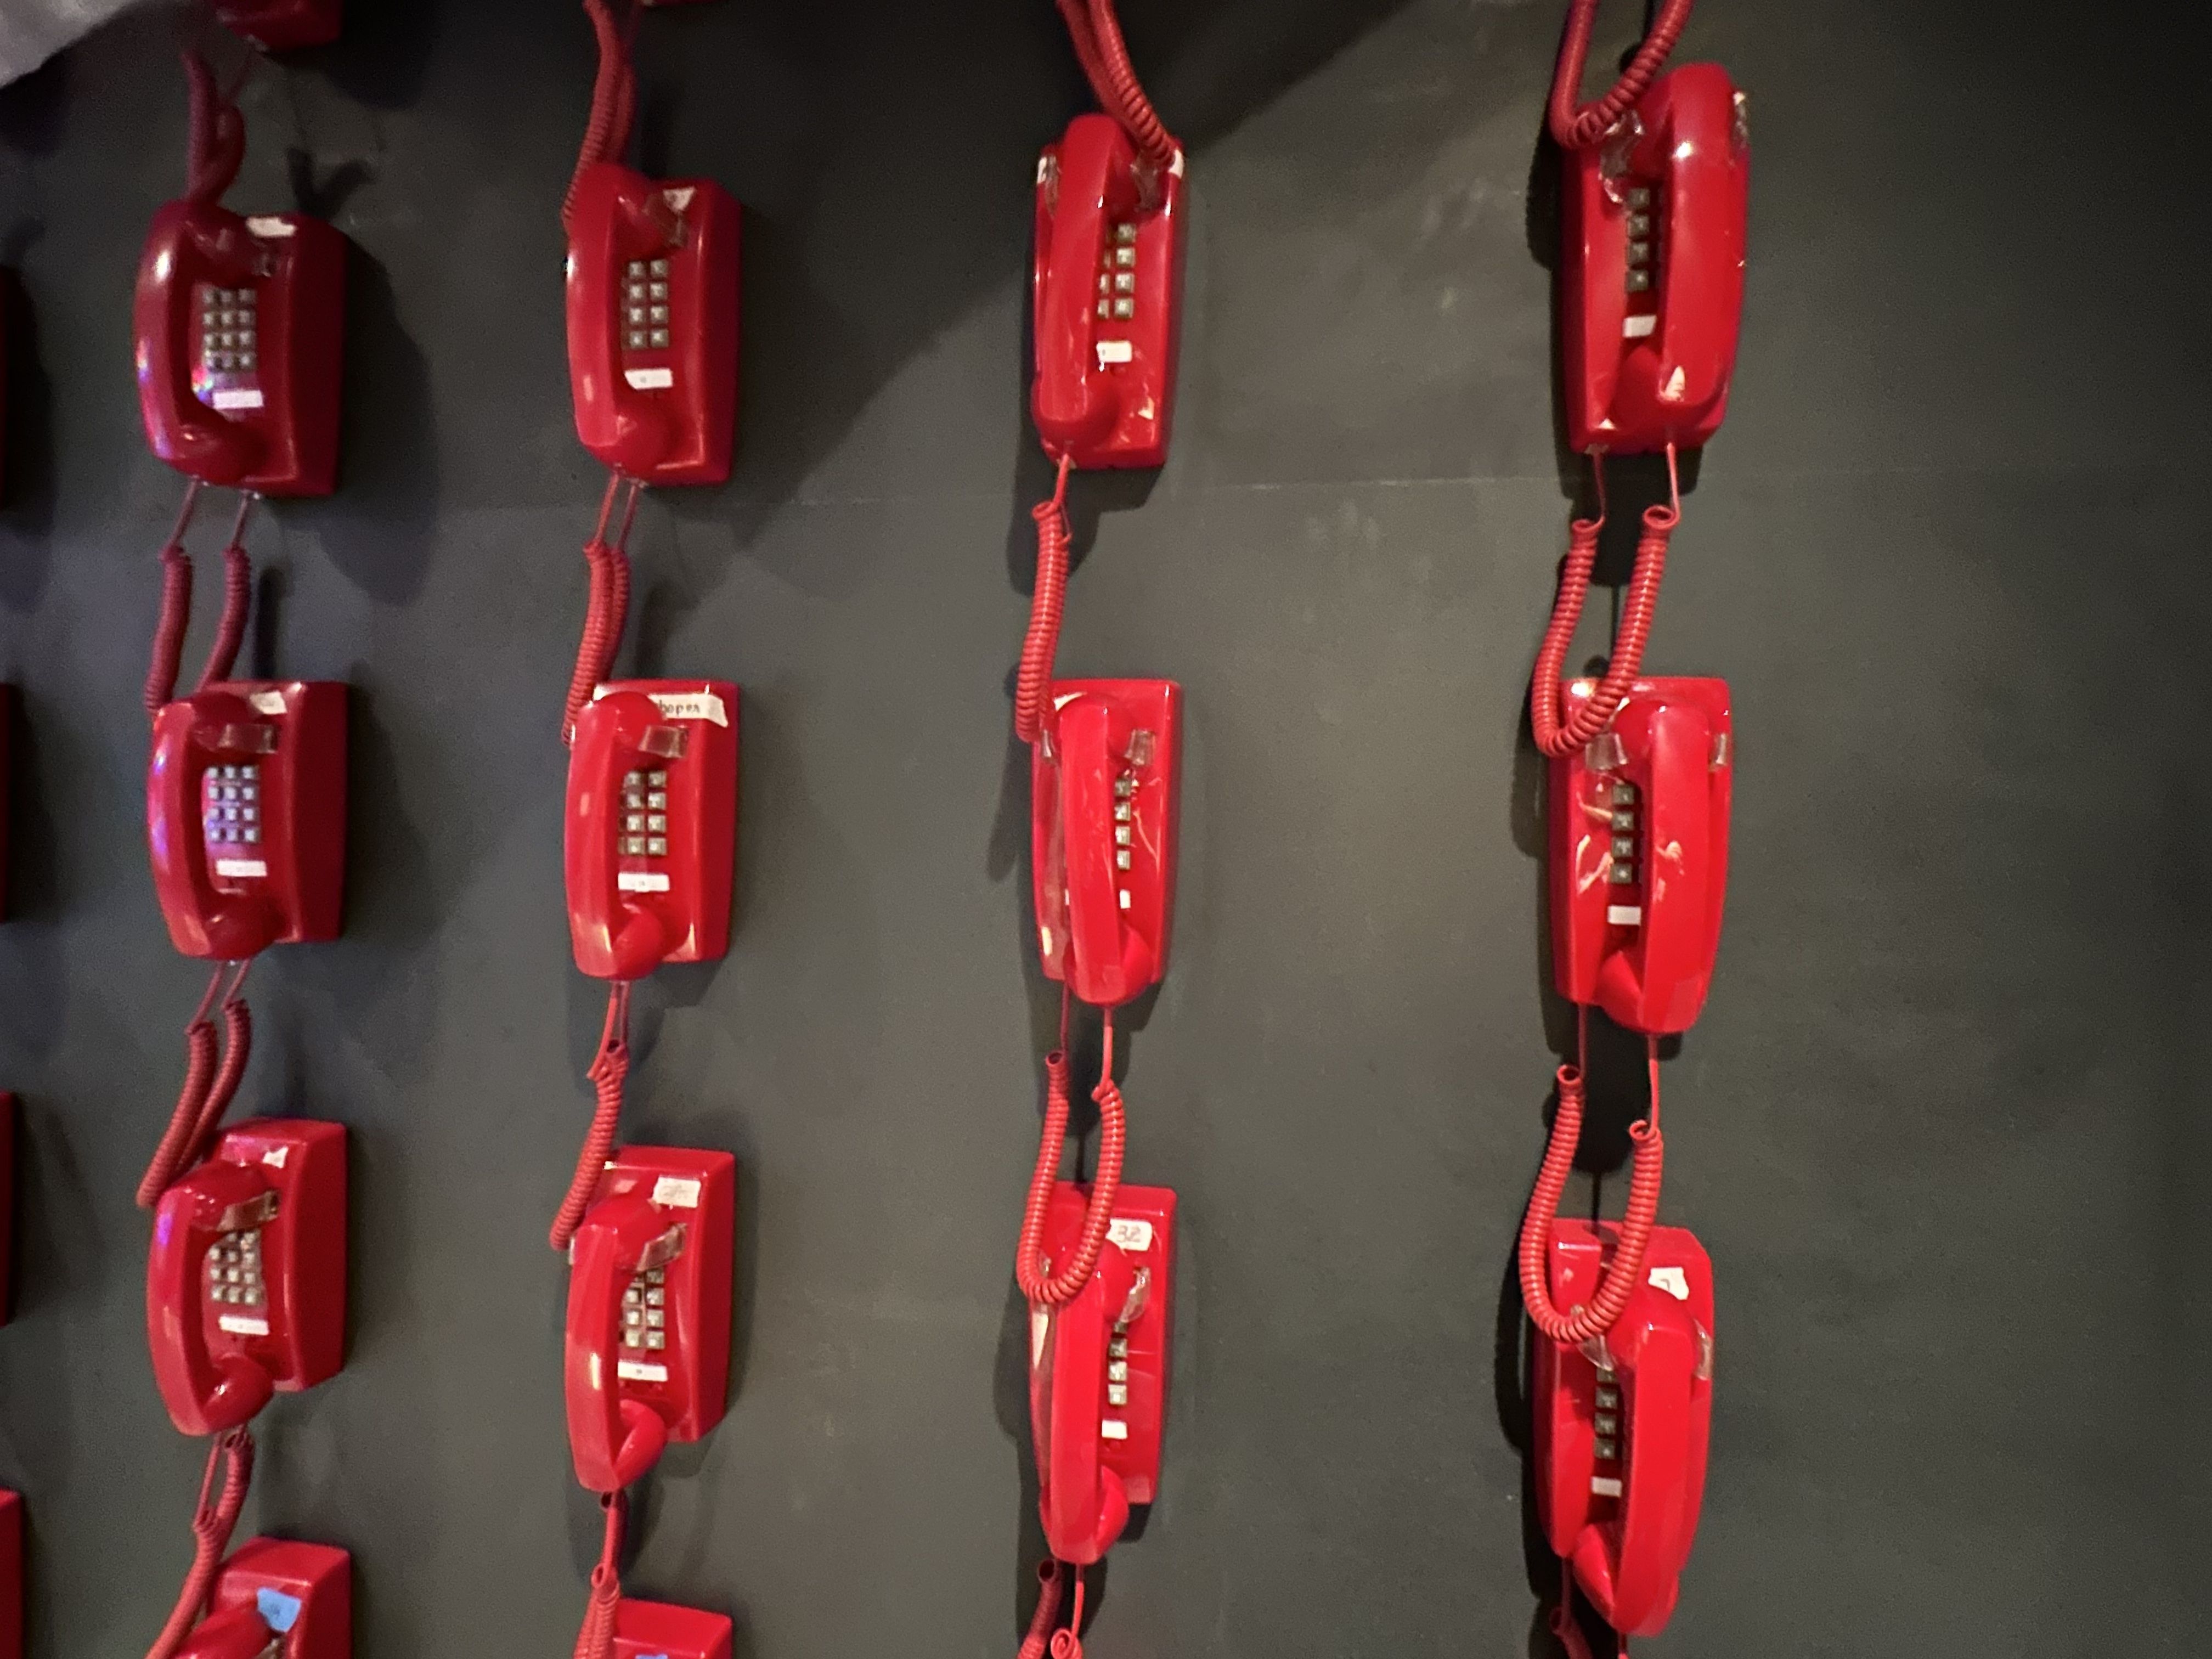 A wall with dozens of red telephones that hang on the wall, each playing a voice of a different changemaker as part of an exhibit at the WNDR Museum Boston.